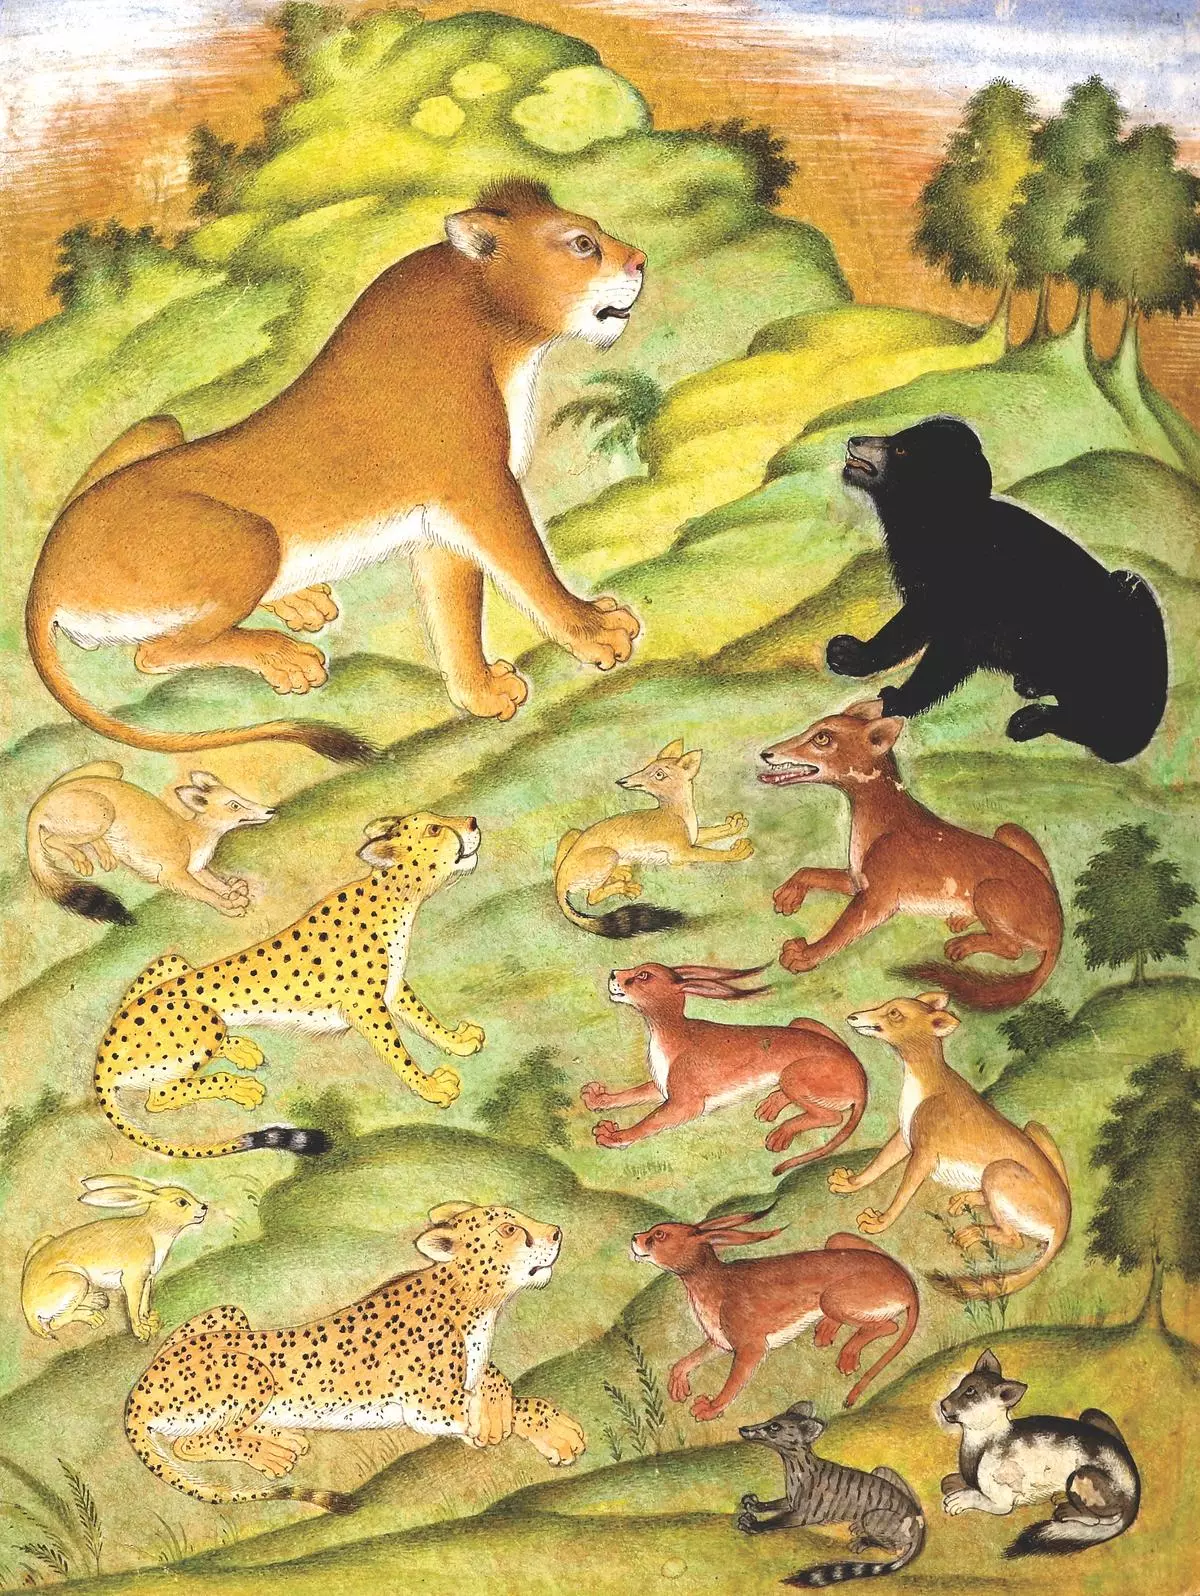 “The Lion in conference with the other animals”, by Ustad Husayn Va’iz Kashifi, ca. 1610 